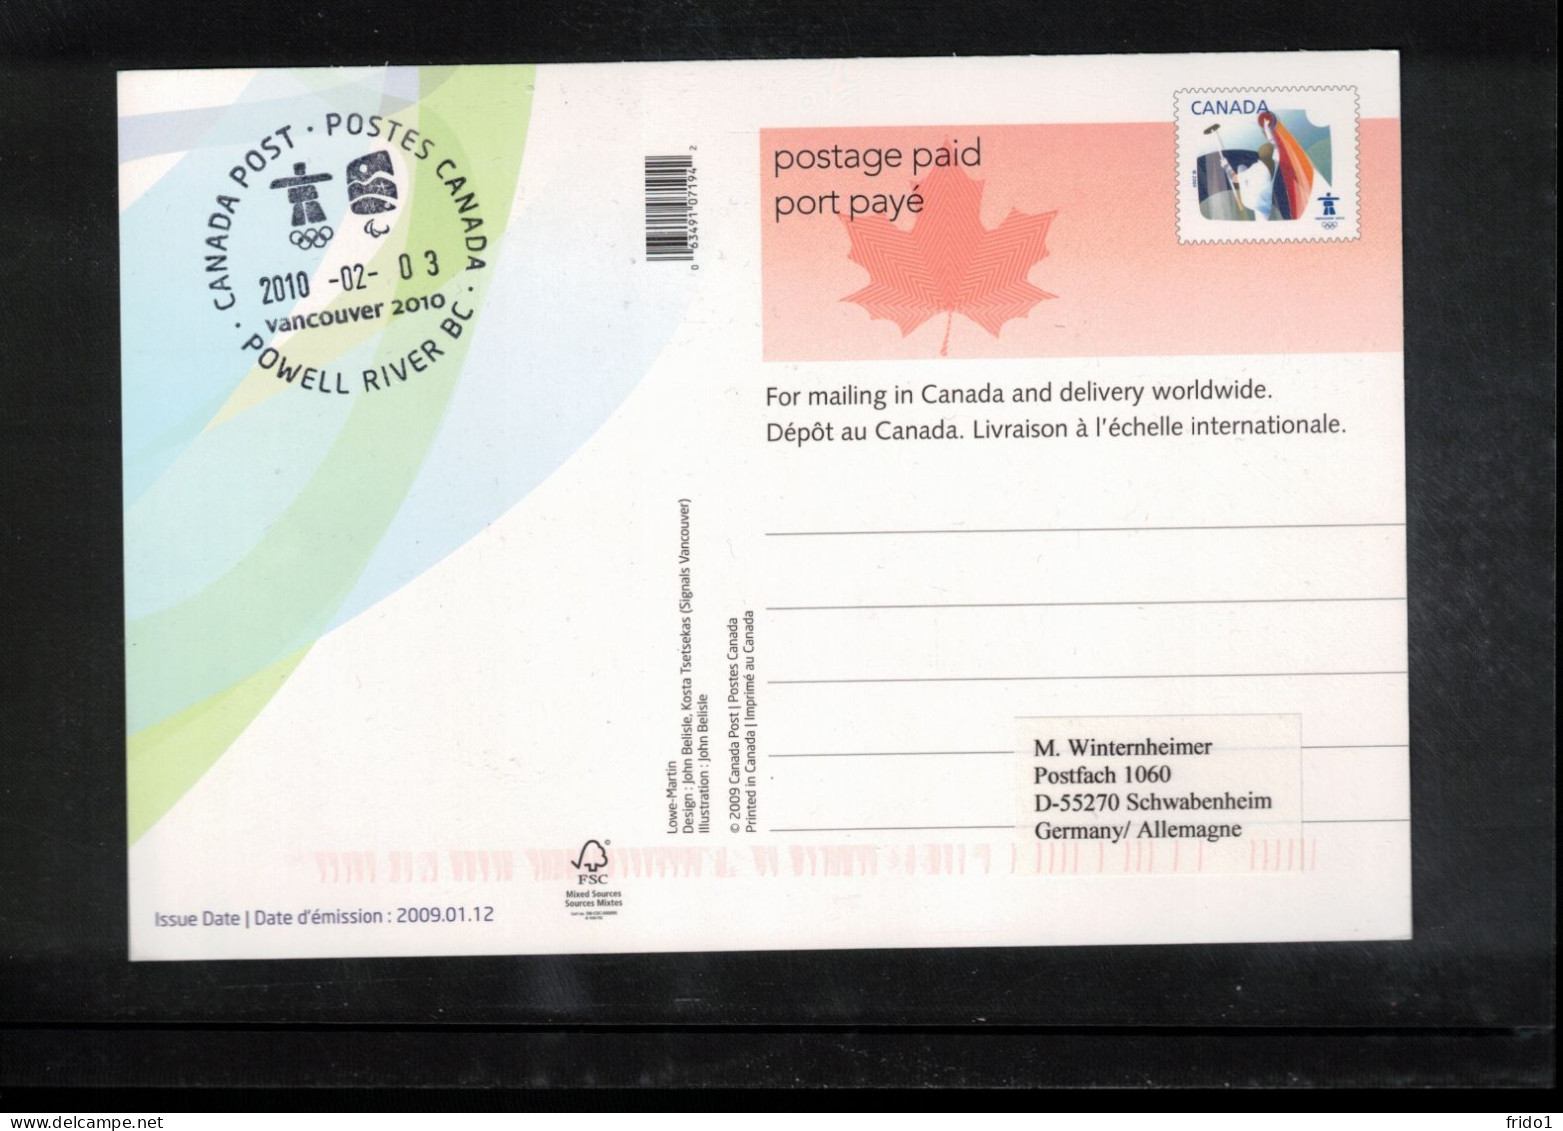 Canada 2010 Olympic Games Vancouver - POWELL RIVER BC Postmark Interesting Postcard - Hiver 2010: Vancouver